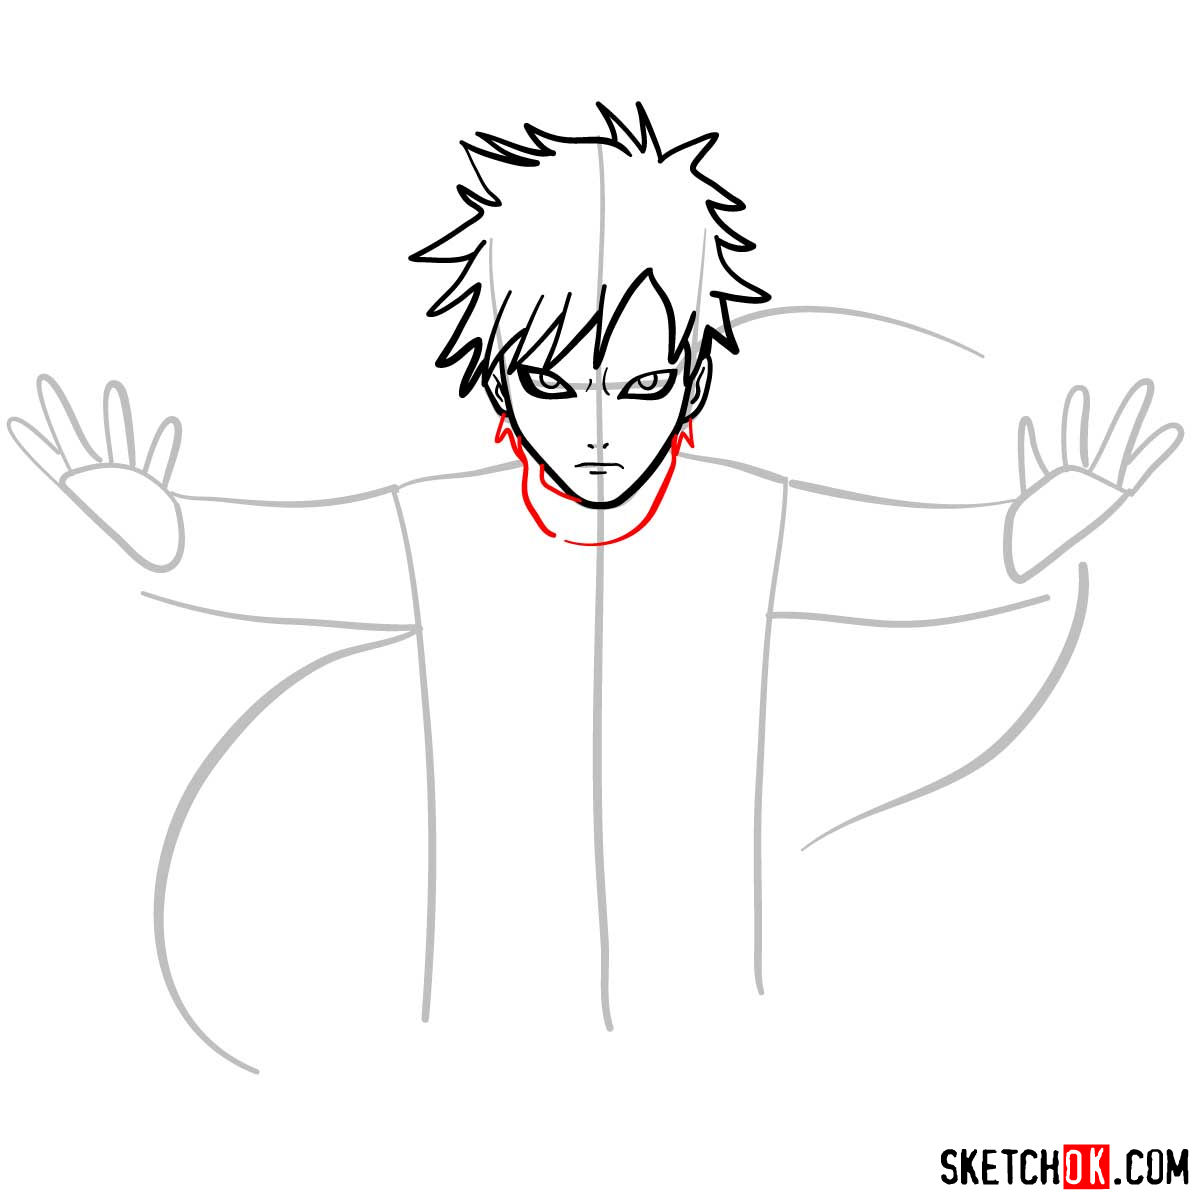 How to draw Gaara from Naruto anime - step 06